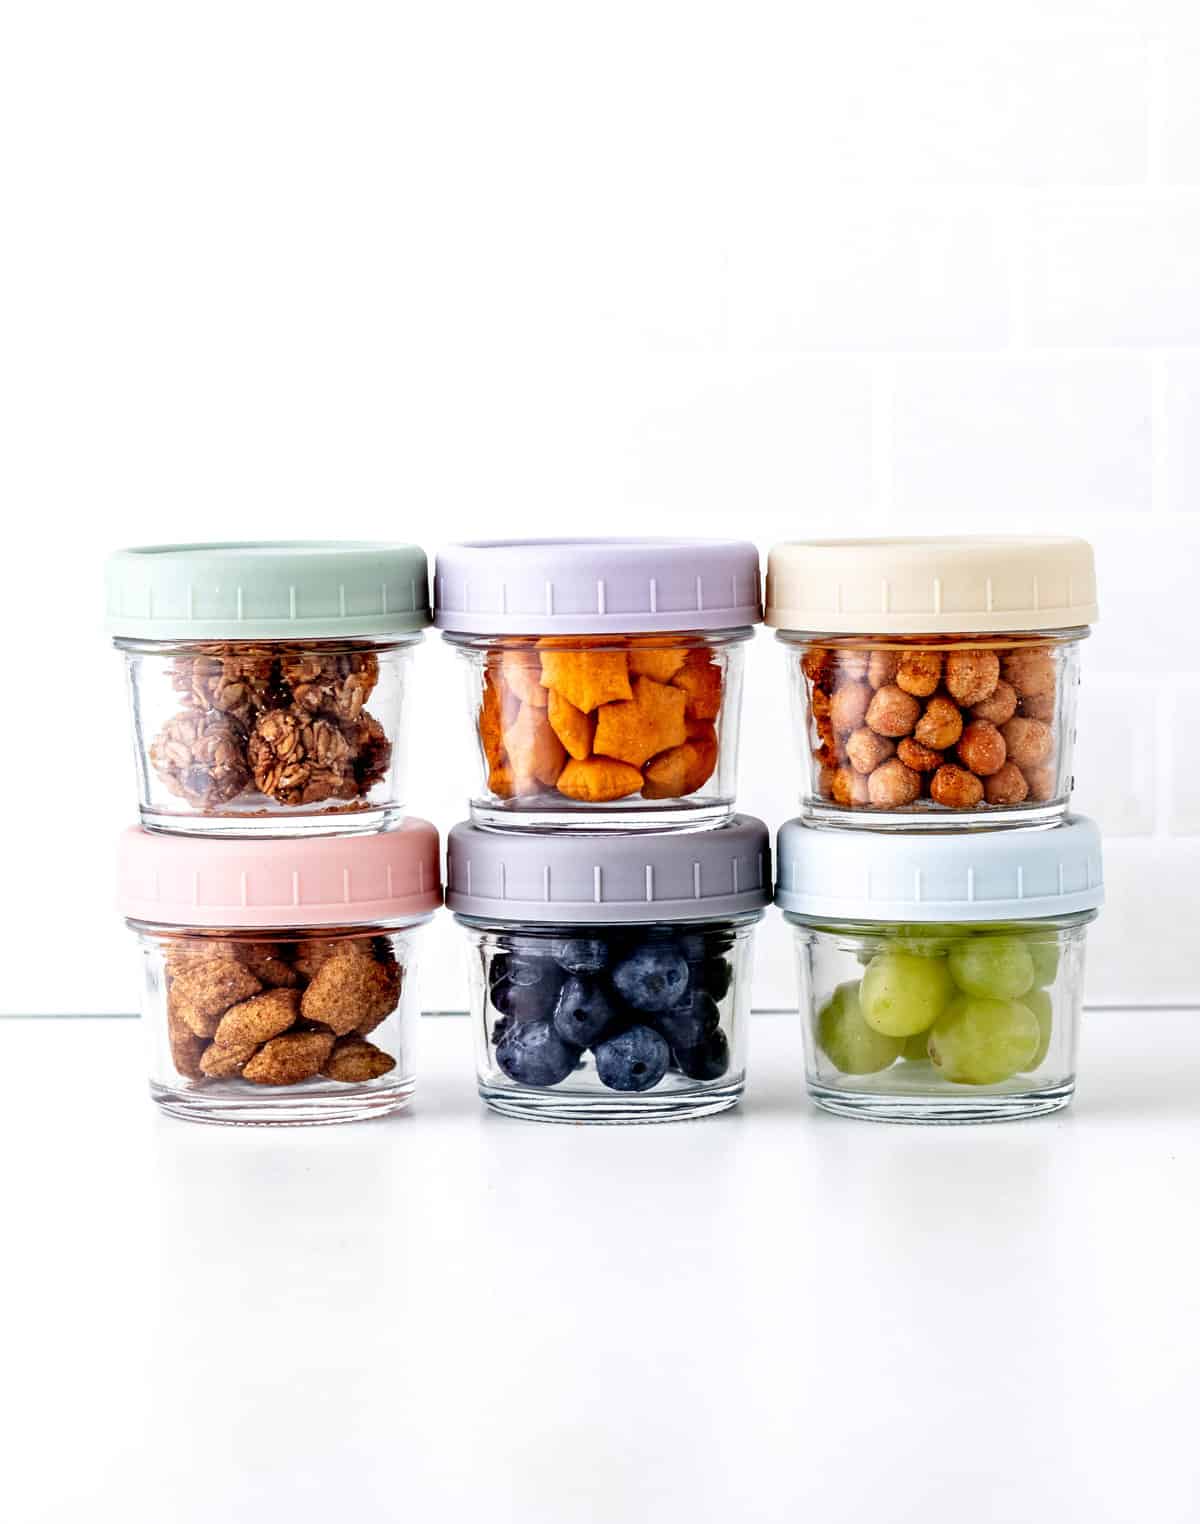 Six small containers stacked with healthy road trip snacks for kids.